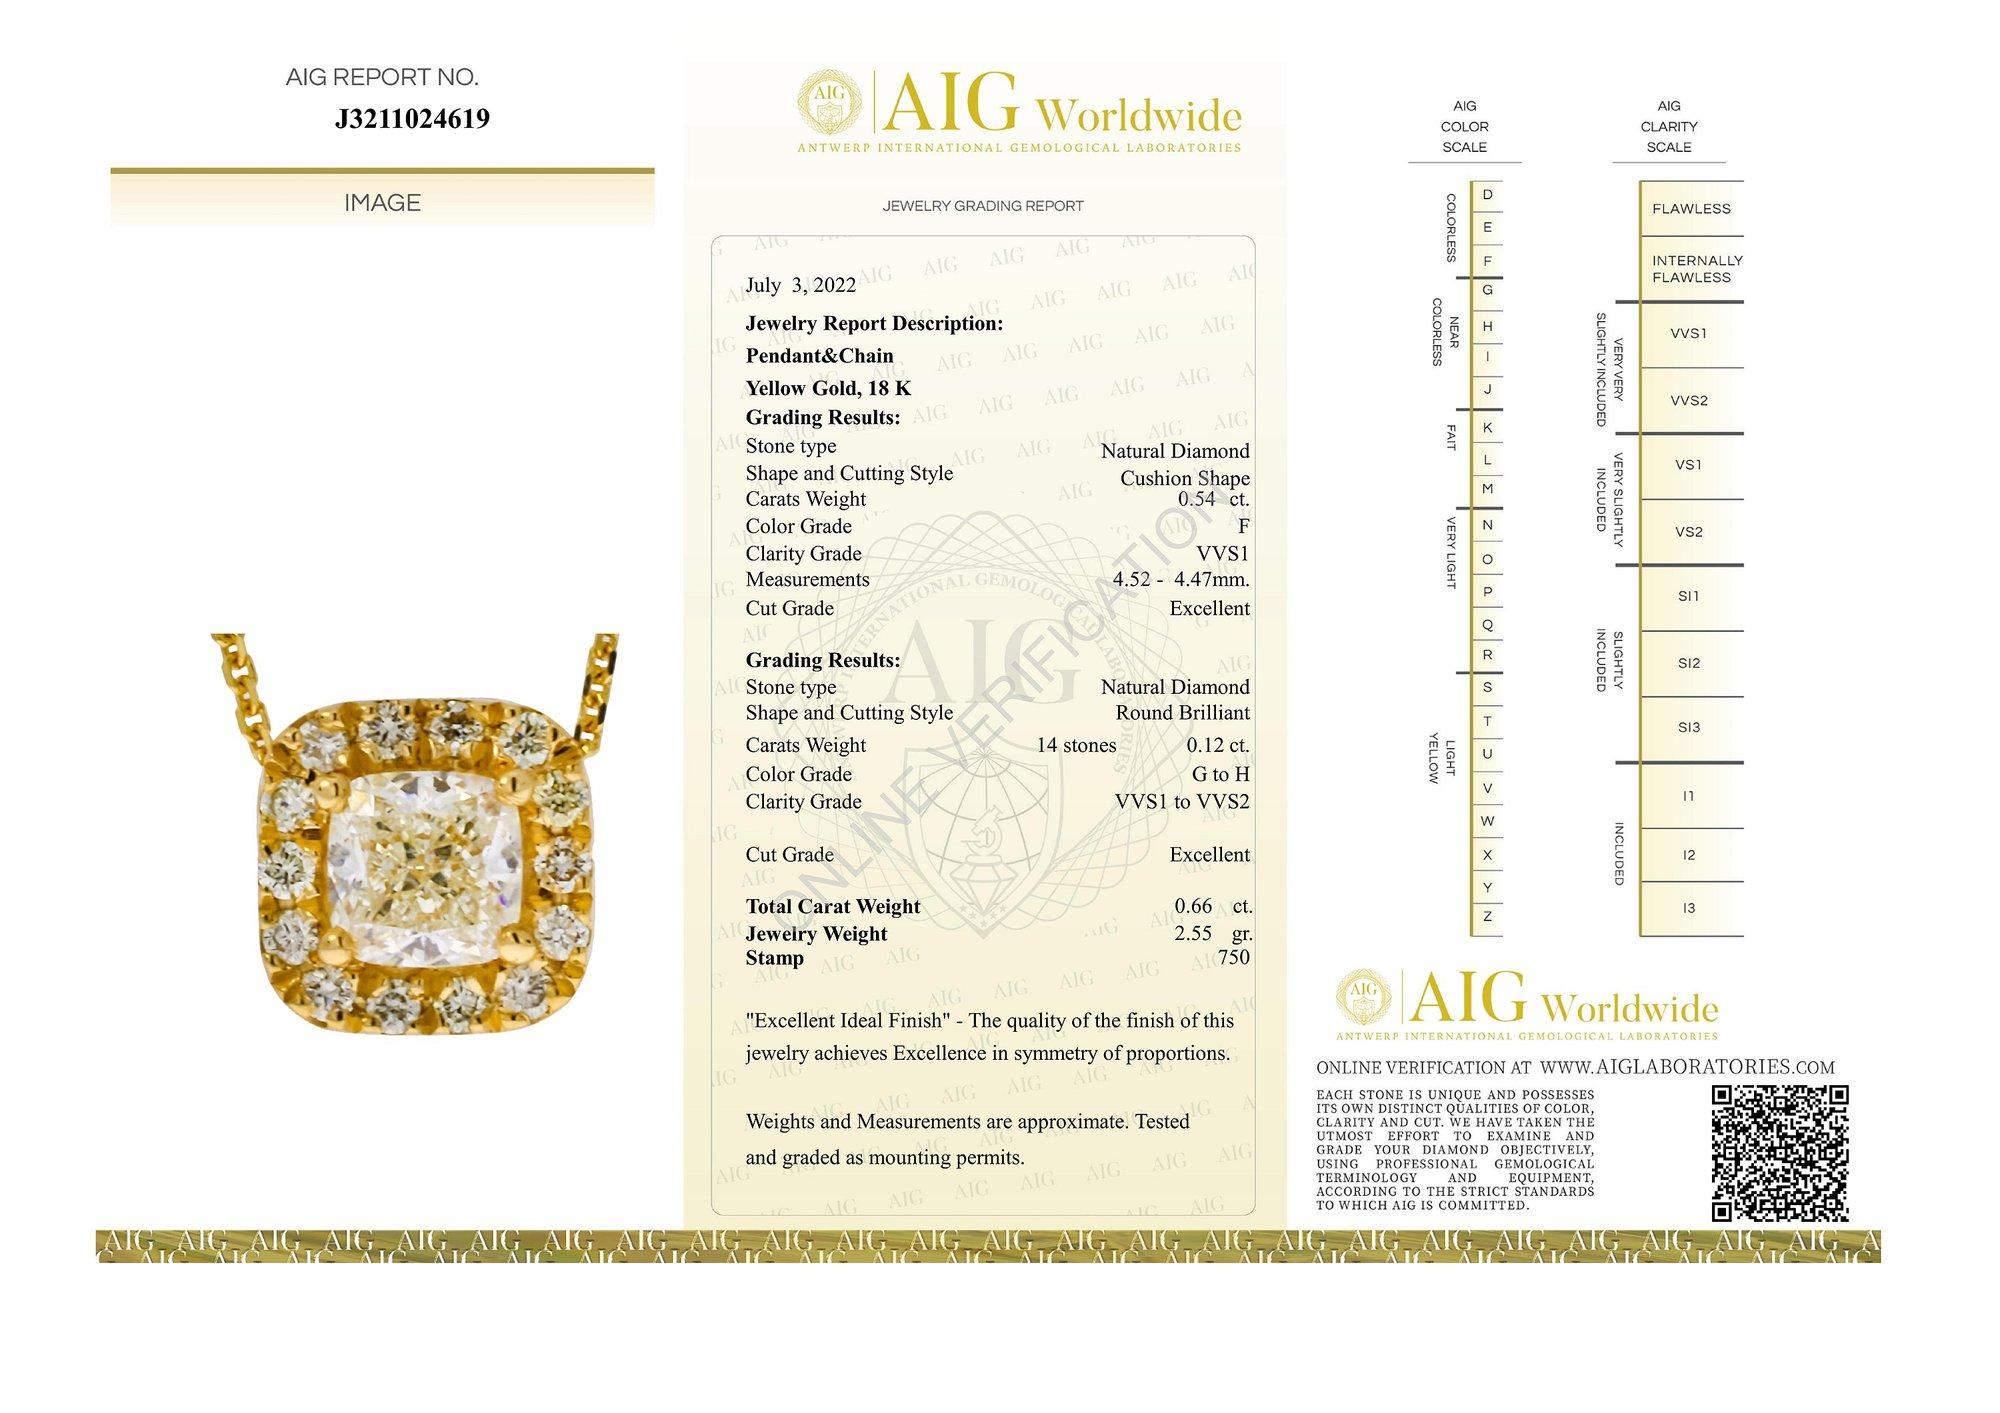 Beautiful halo diamond pendant with chain made from 18k yellow gold with 0.66 total carat of cushion shape diamond and round brilliant diamonds. This pendant with chain comes with an AIG certificate and a fancy box.

-1 diamond main stone of 0.54